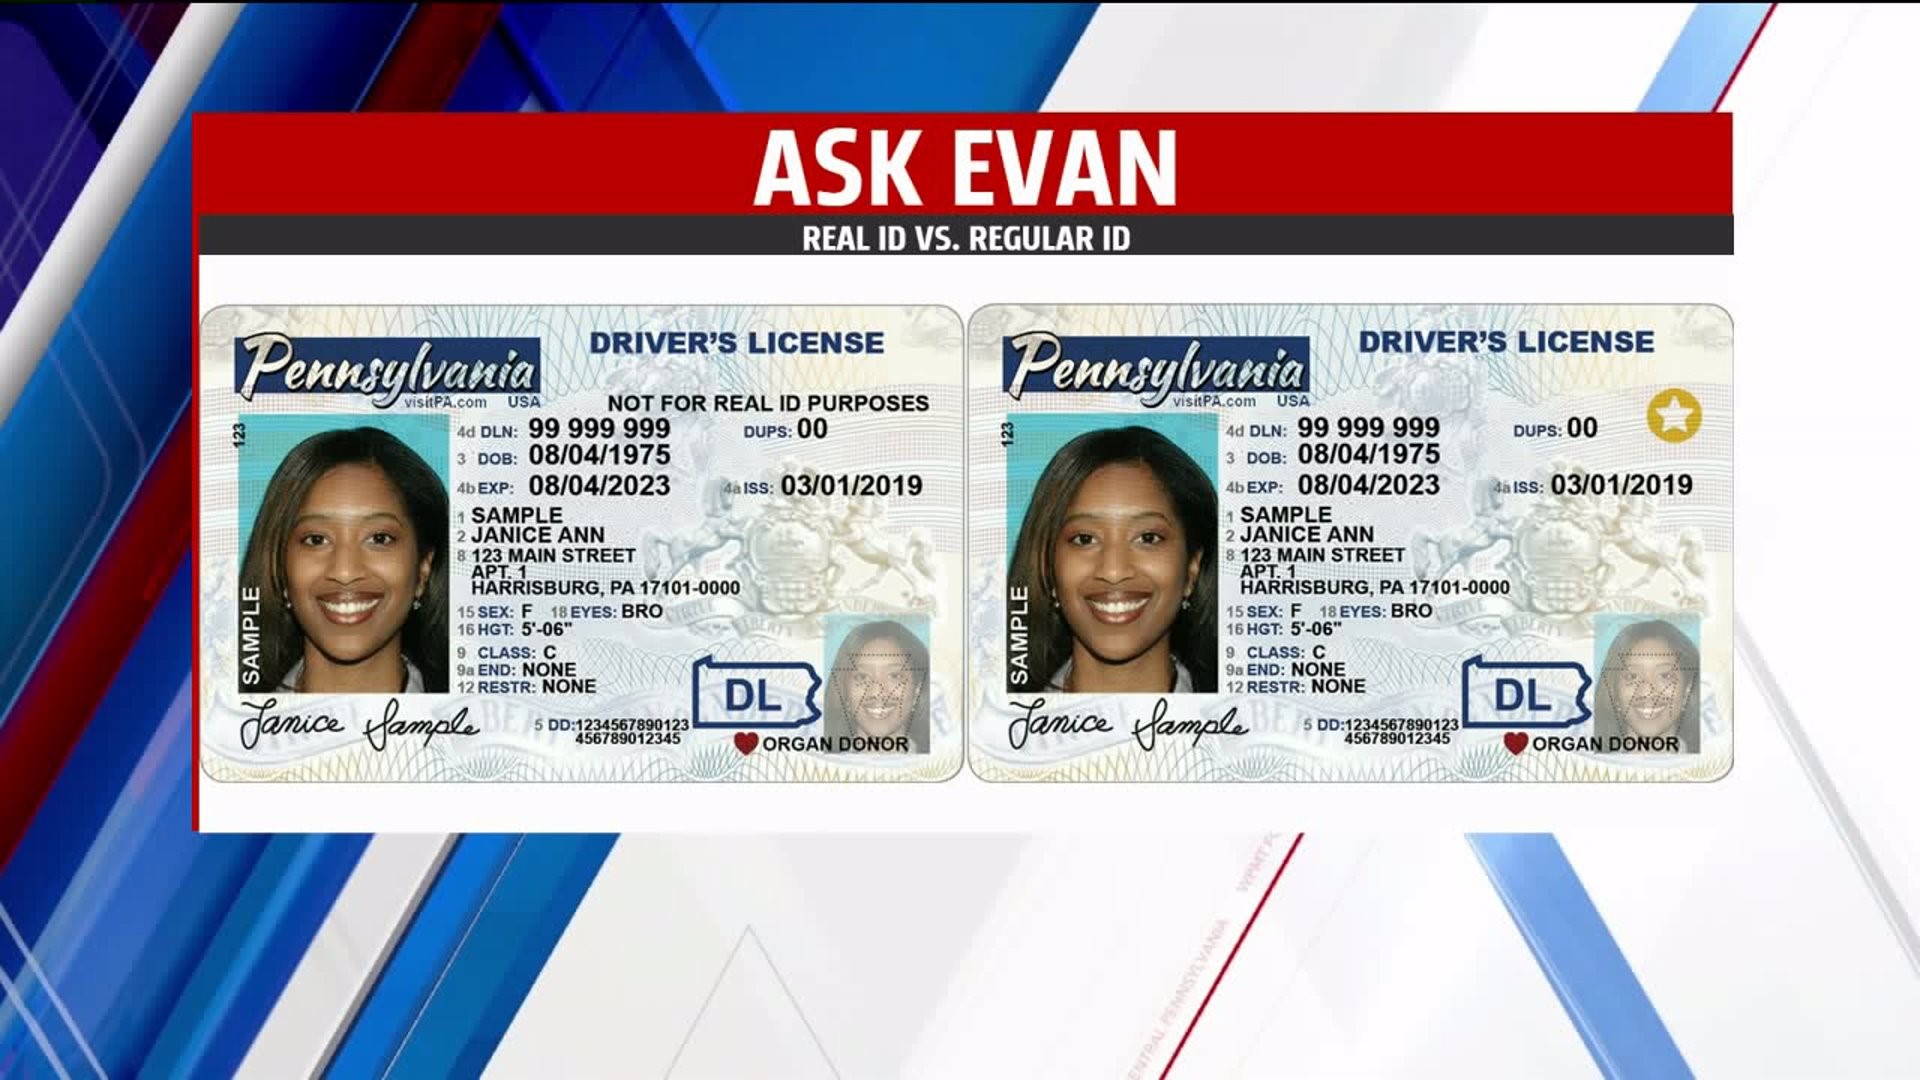 difference between driver's license and real id